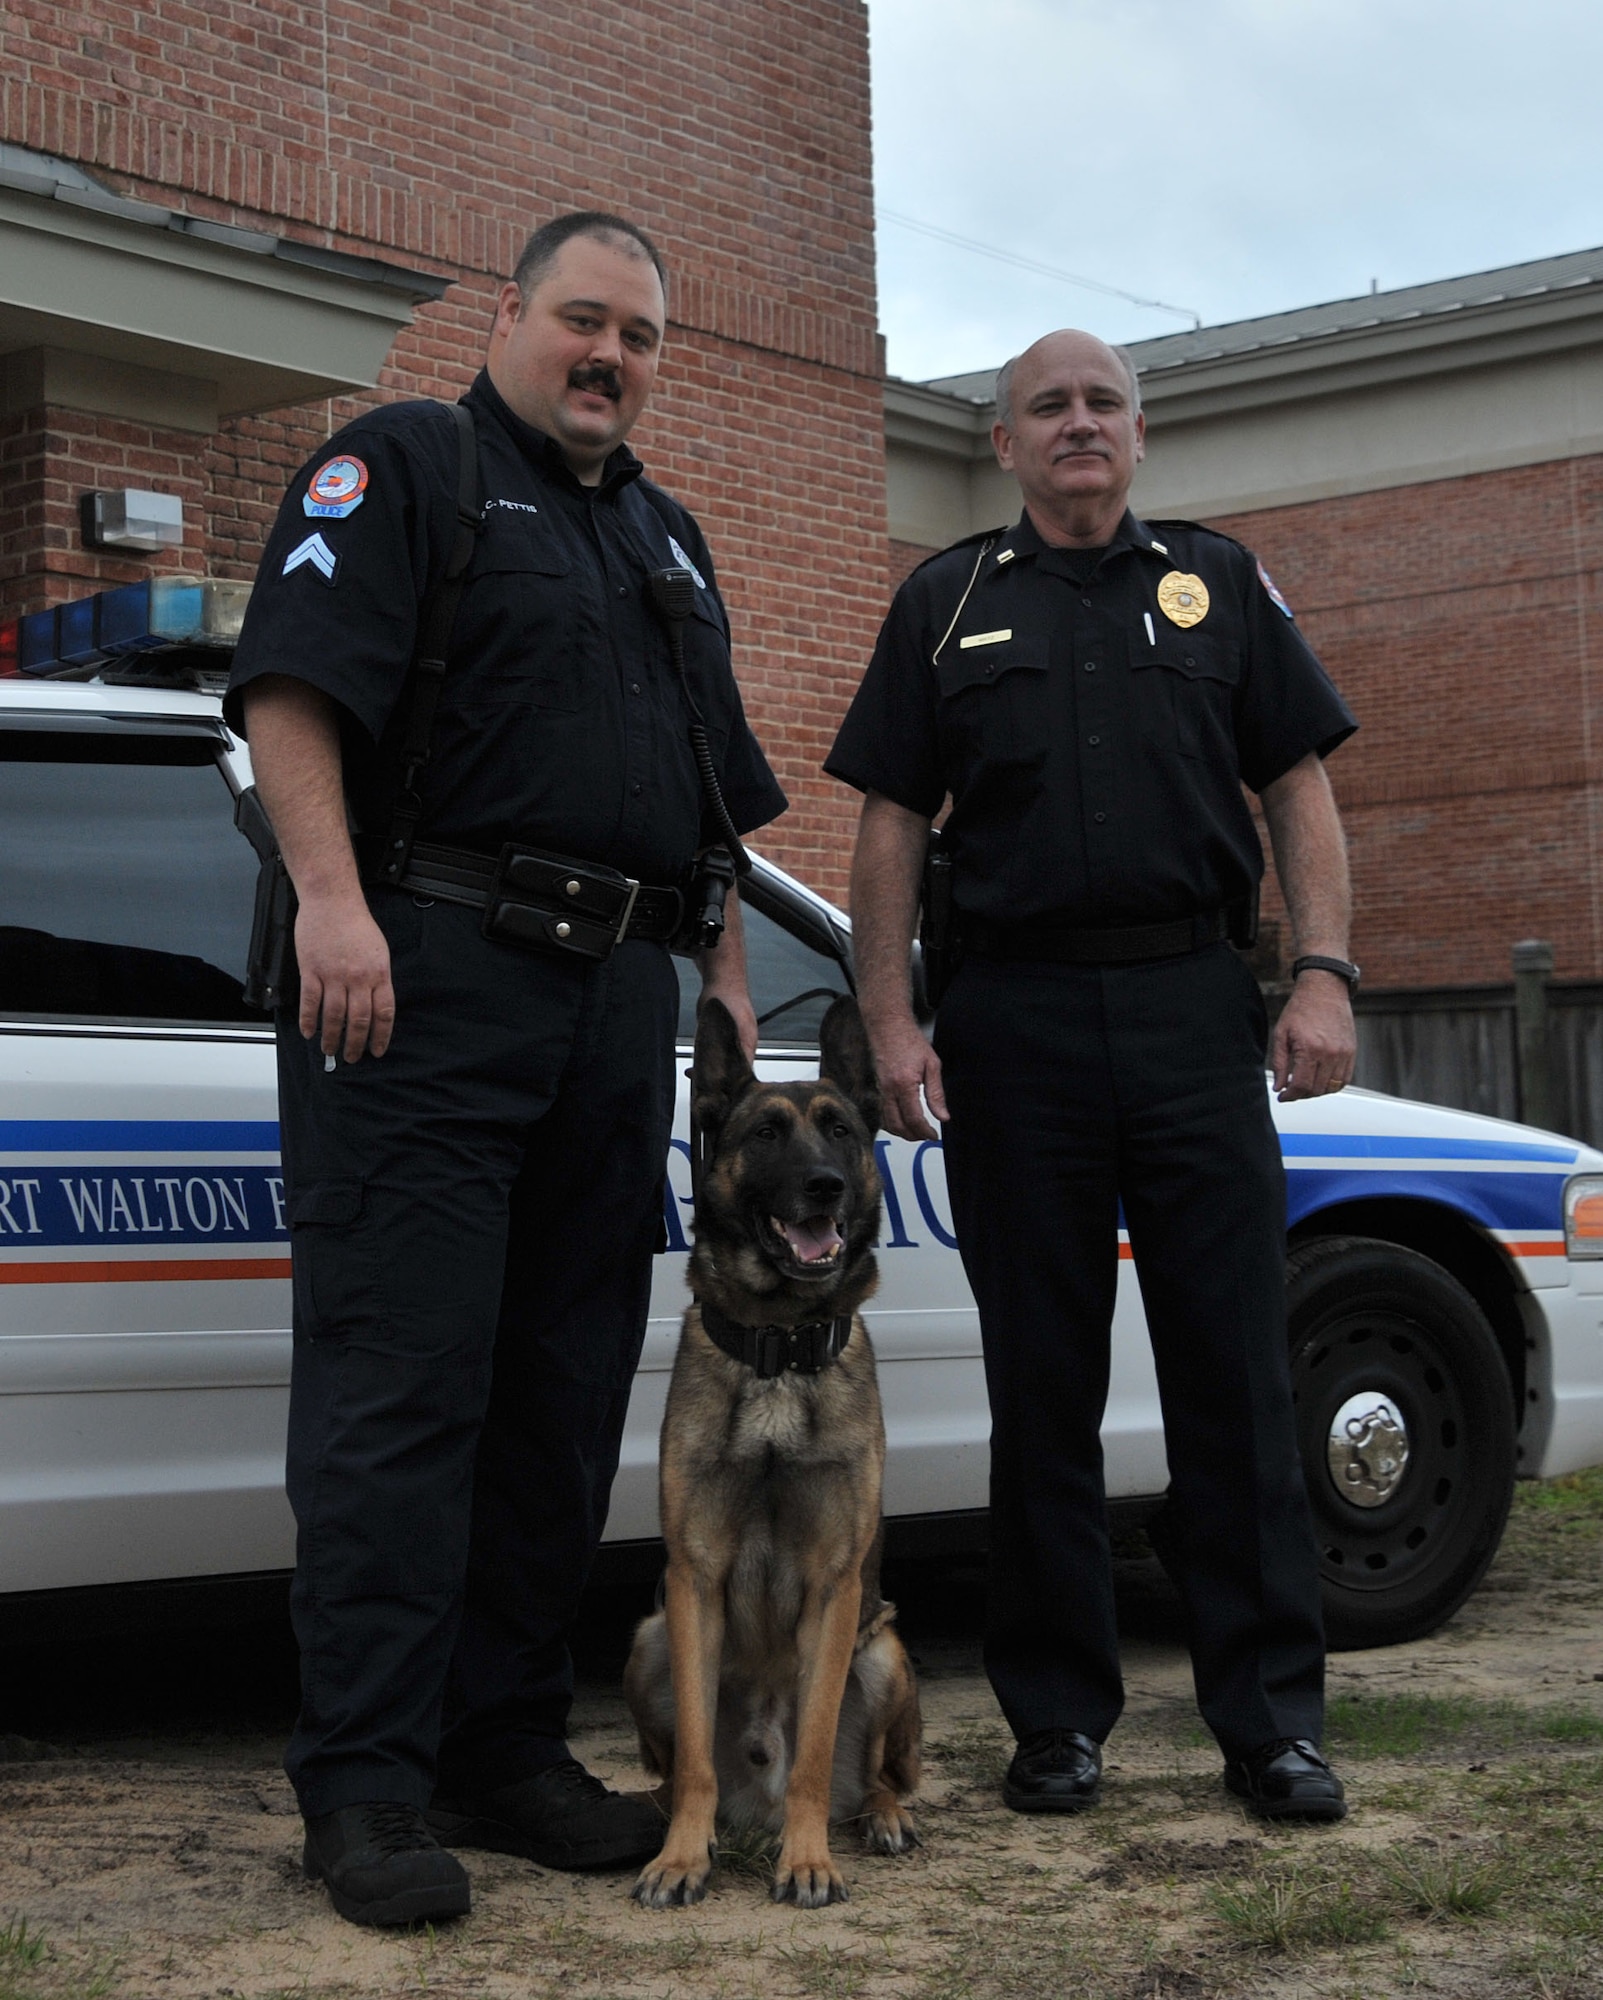 Fort Walton Beach police Cpl. Charles Pettis and police Capt. Tom Mhez pose with Astro the narcotic detection dog at the police department in Fort Walton Beach, Fla., Dec. 9, 2013. The military donated Astro, formally known as Astor, to the FWB Police Department in April of 2011. (US Air Force Photo/Airman 1st Class Andrea Posey)